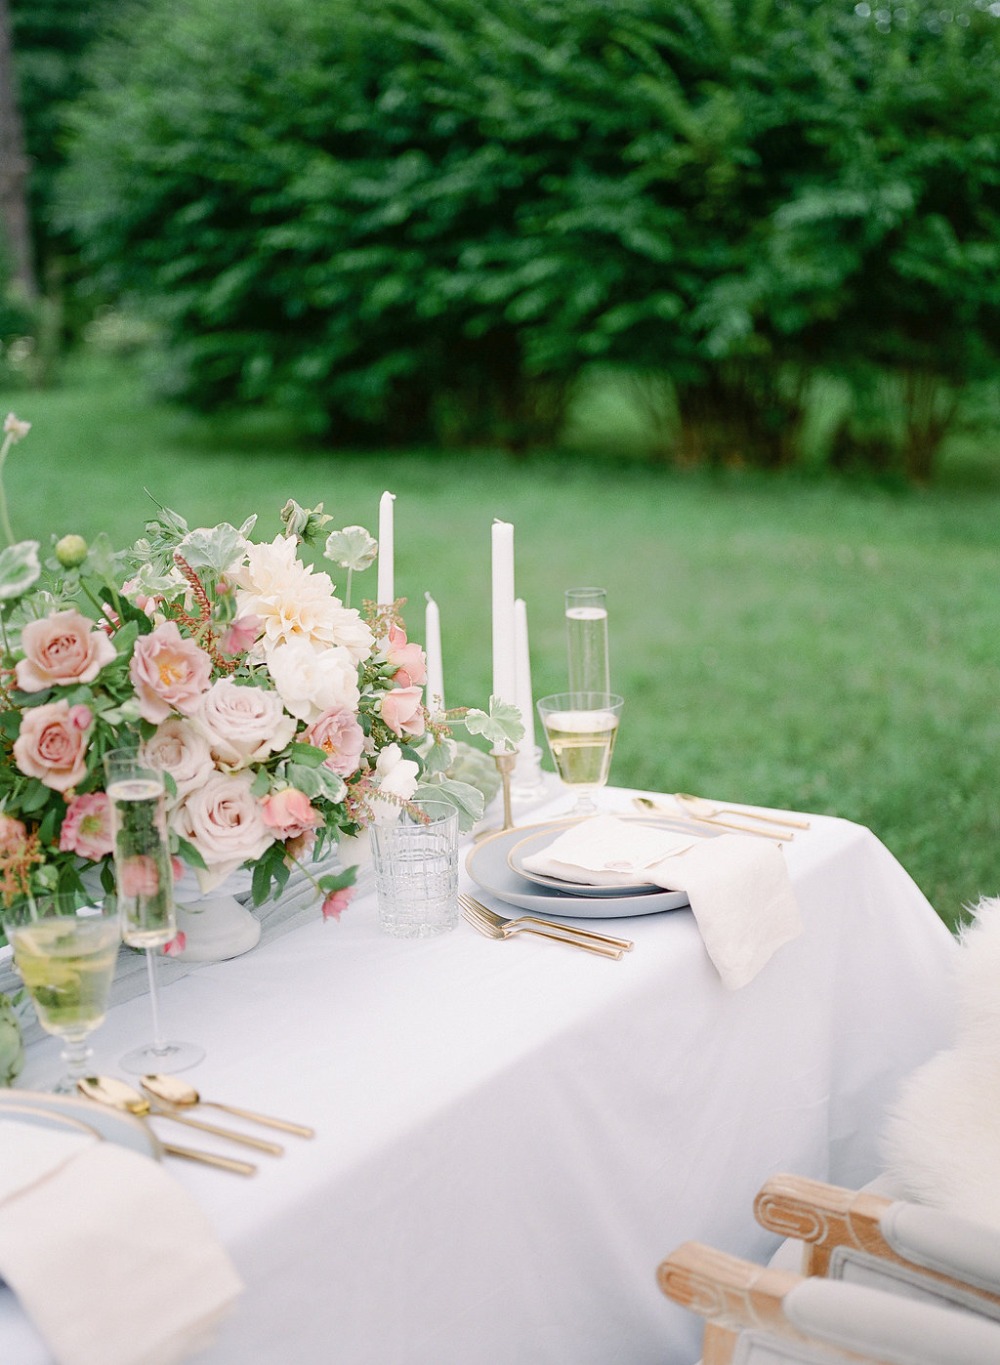 Clean and modern sweetheart table